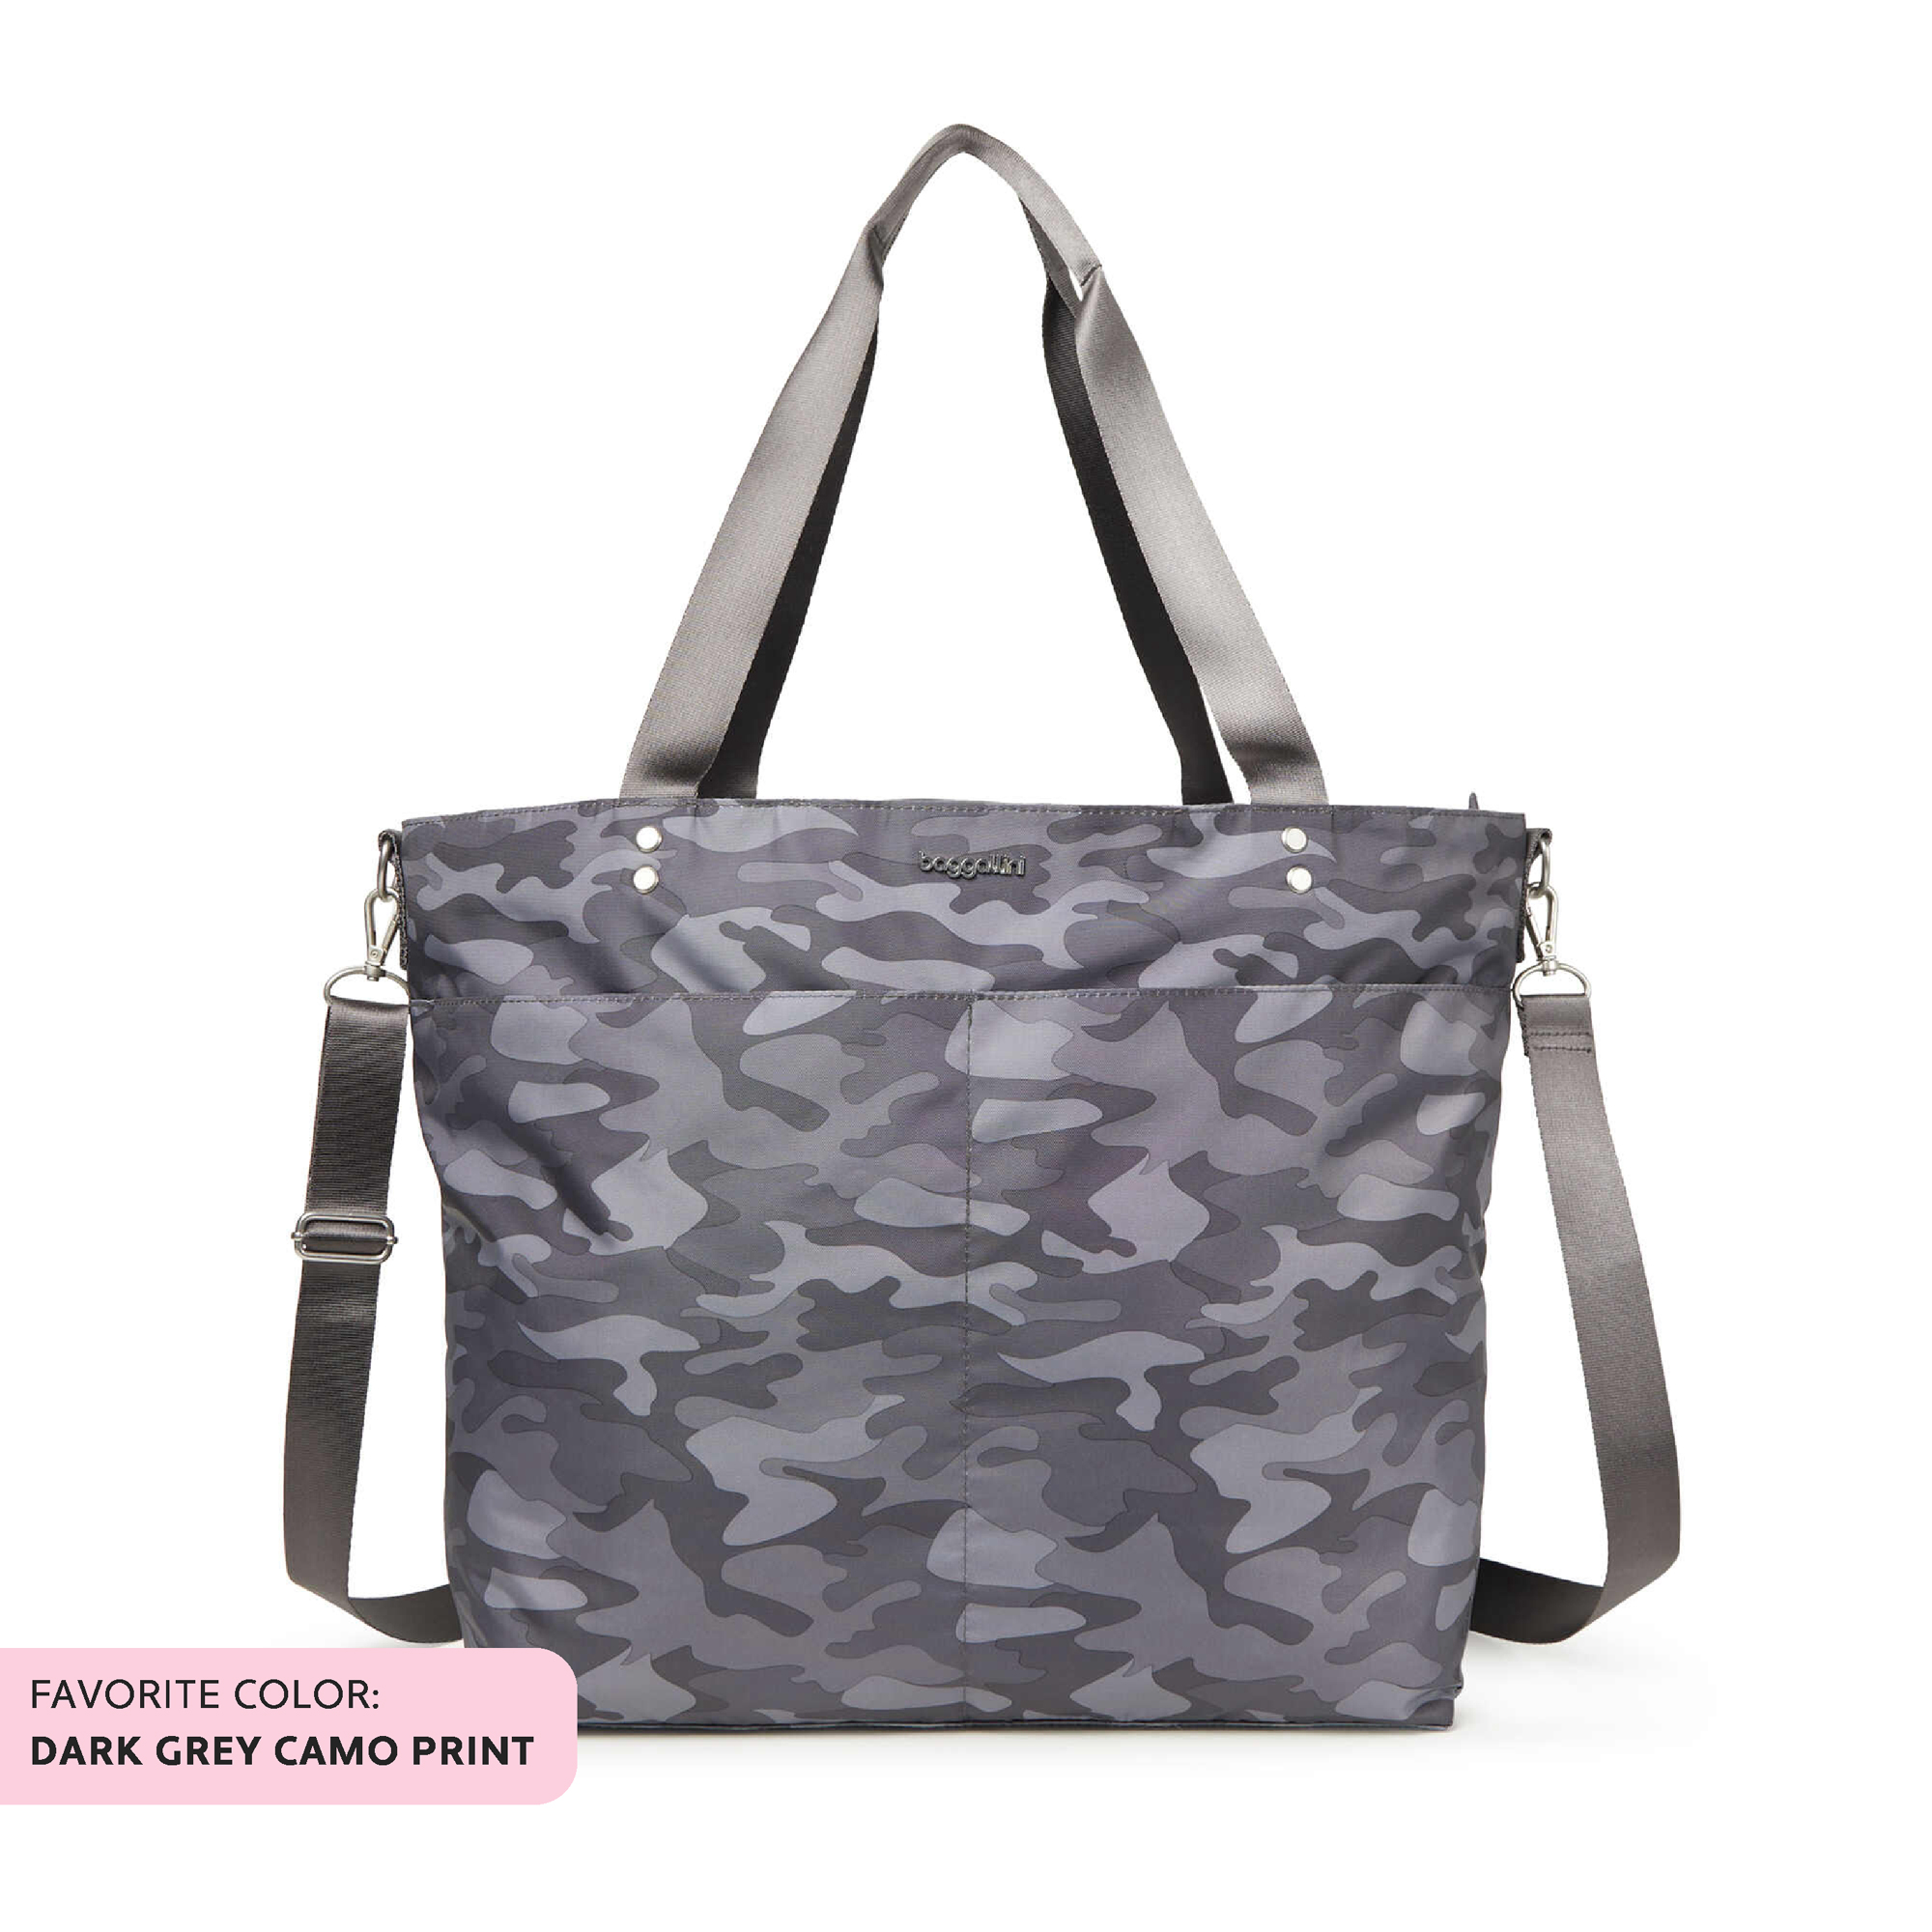 The Large Carryall Tote